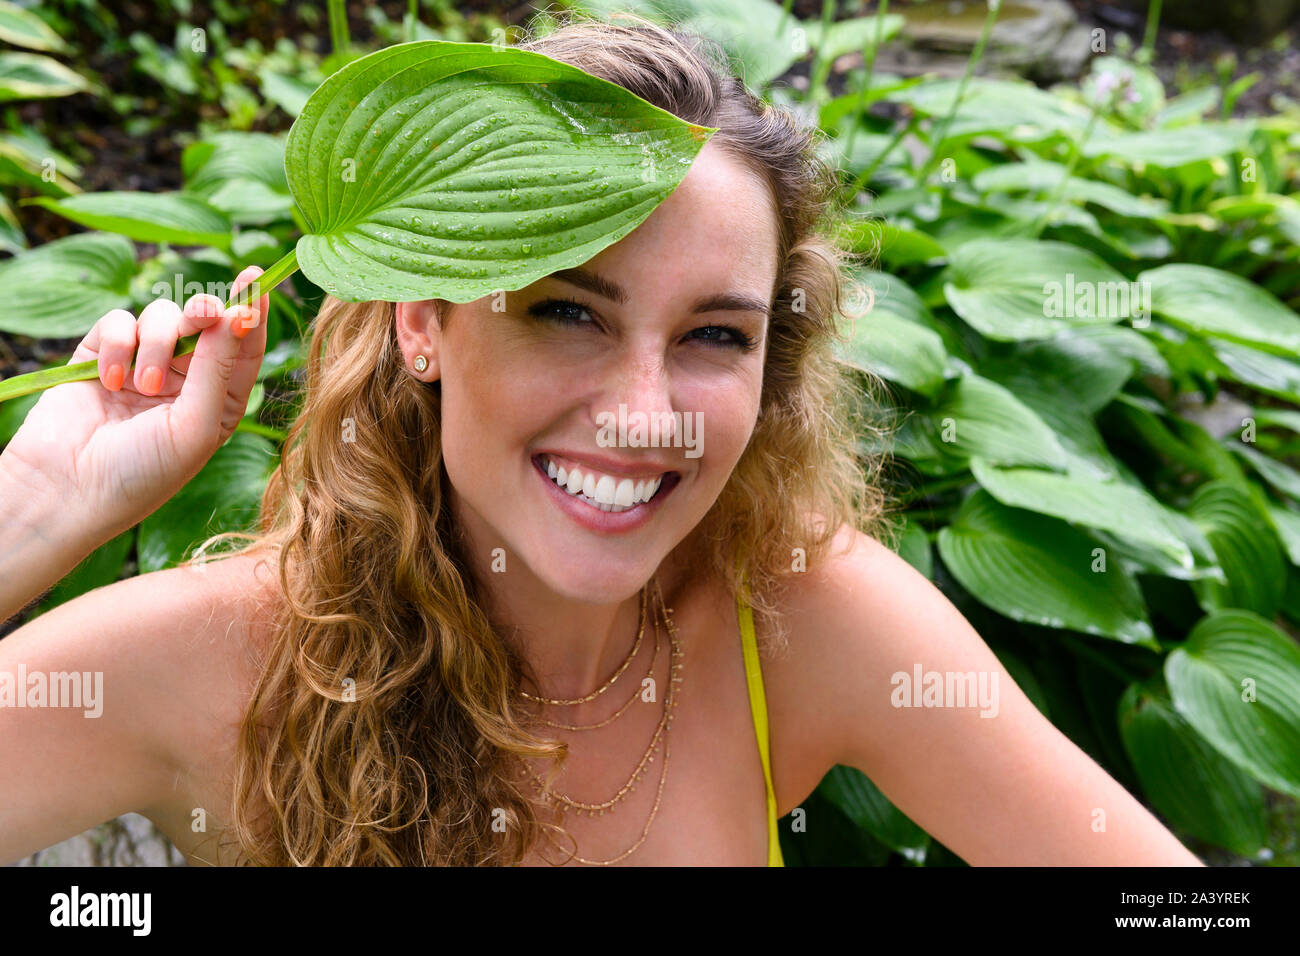 Smiling young woman holding green leaf Stock Photo